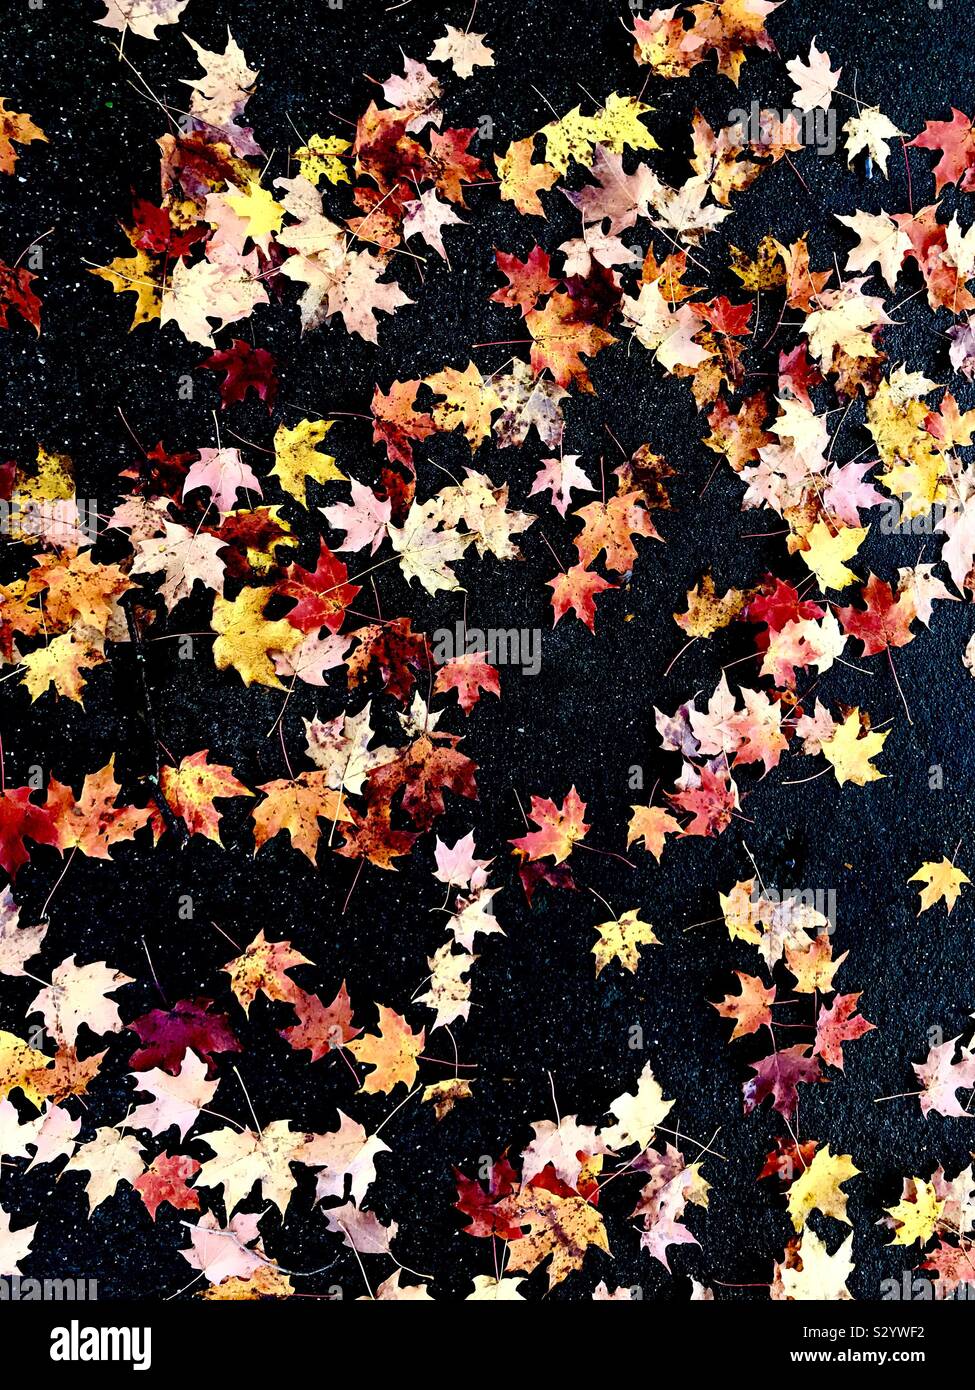 Colorful fall leaves against black ground. Stock Photo